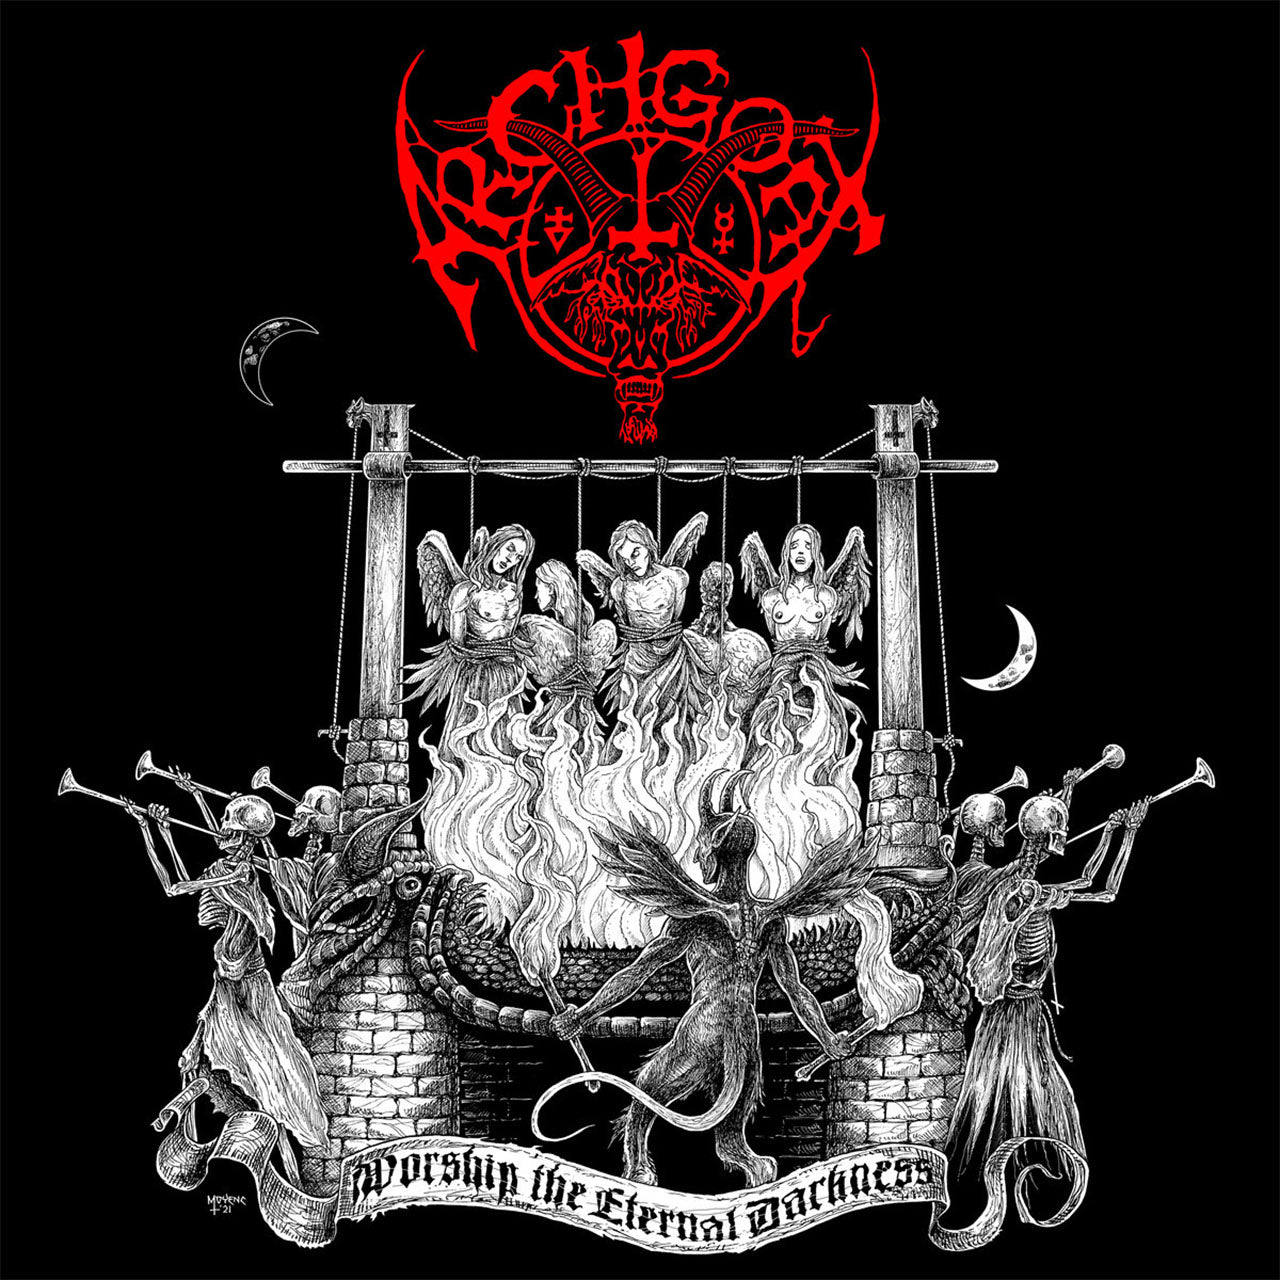 Archgoat - Worship the Eternal Darkness (Red Edition) (LP)